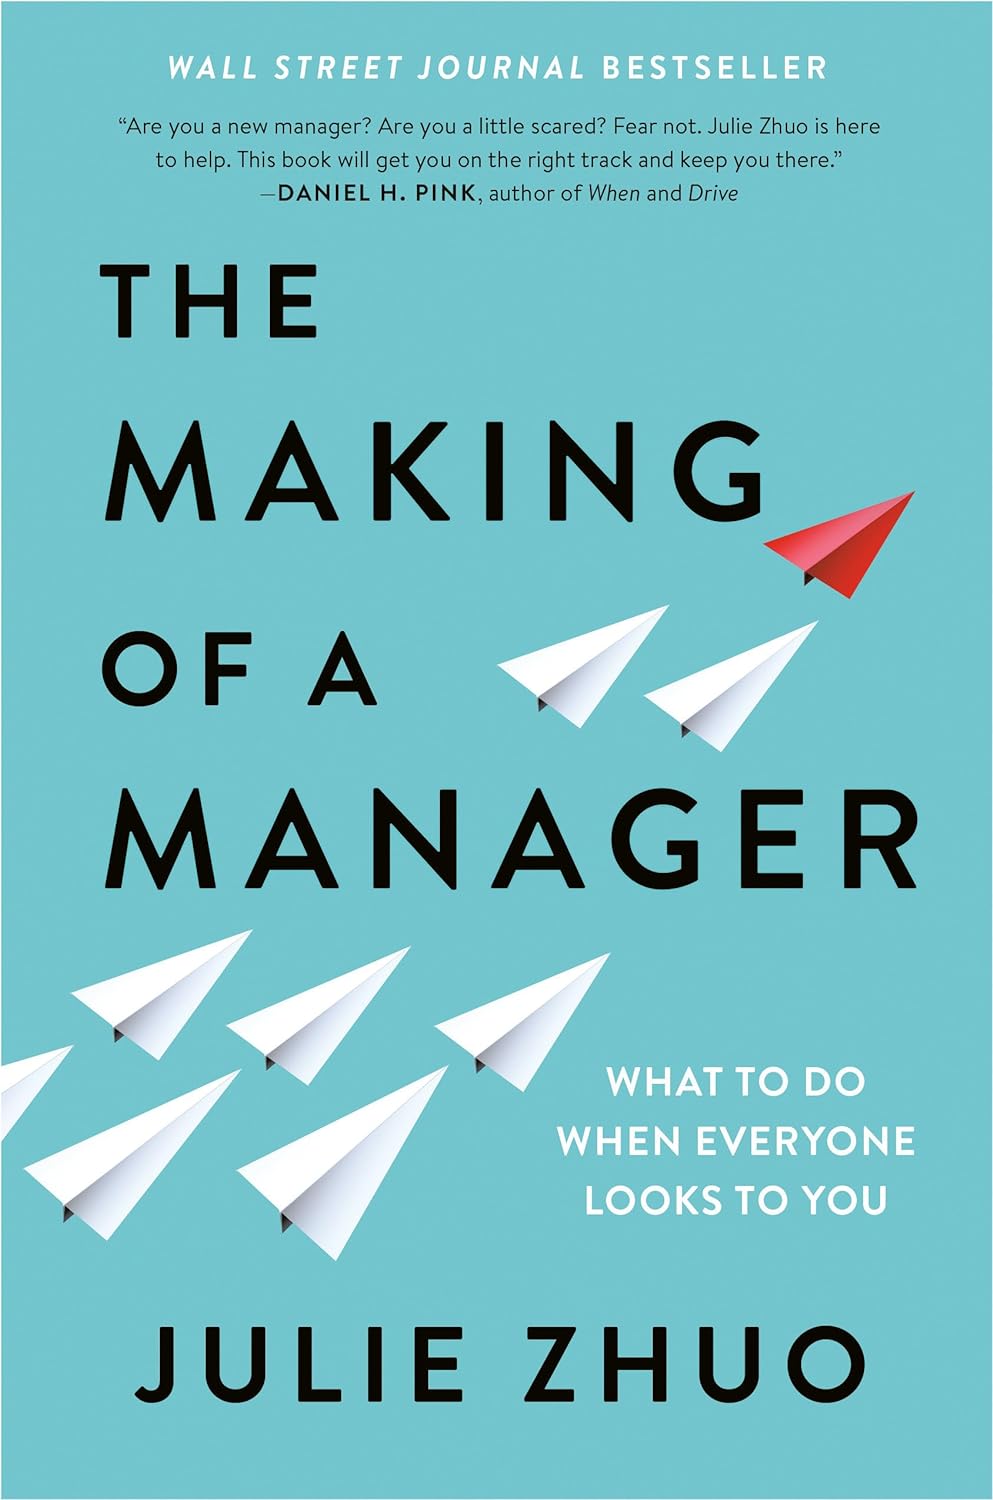 The Making of a Manager What to Do When Everyone Looks to You by Julie Zhuo